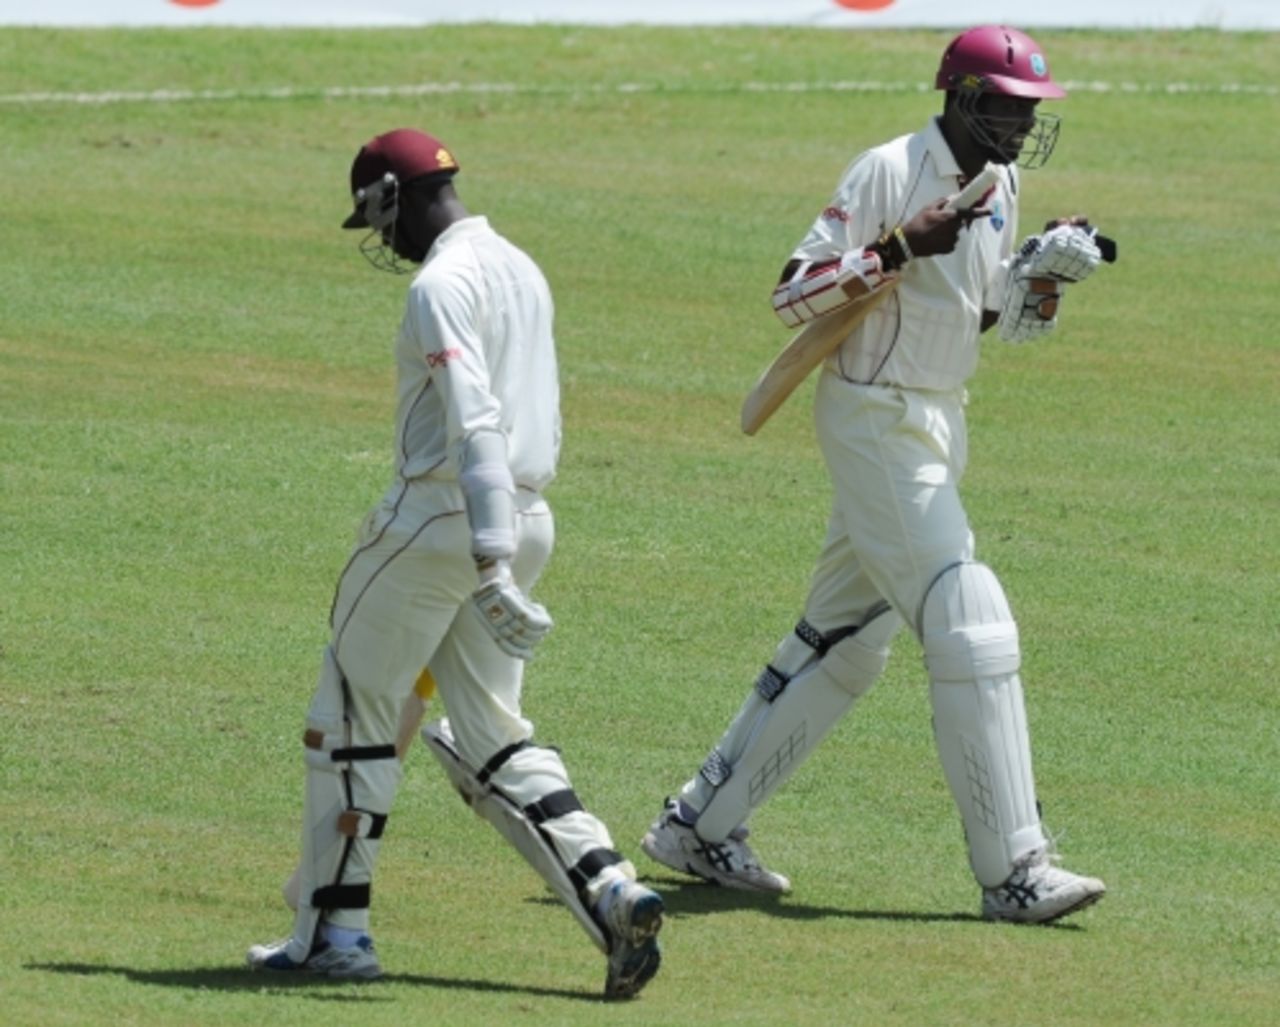 There was a procession of batsmen to and from the crease as West Indies collapsed after lunch, West Indies v South Africa, 1st Test, Trinidad, June 12, 2010